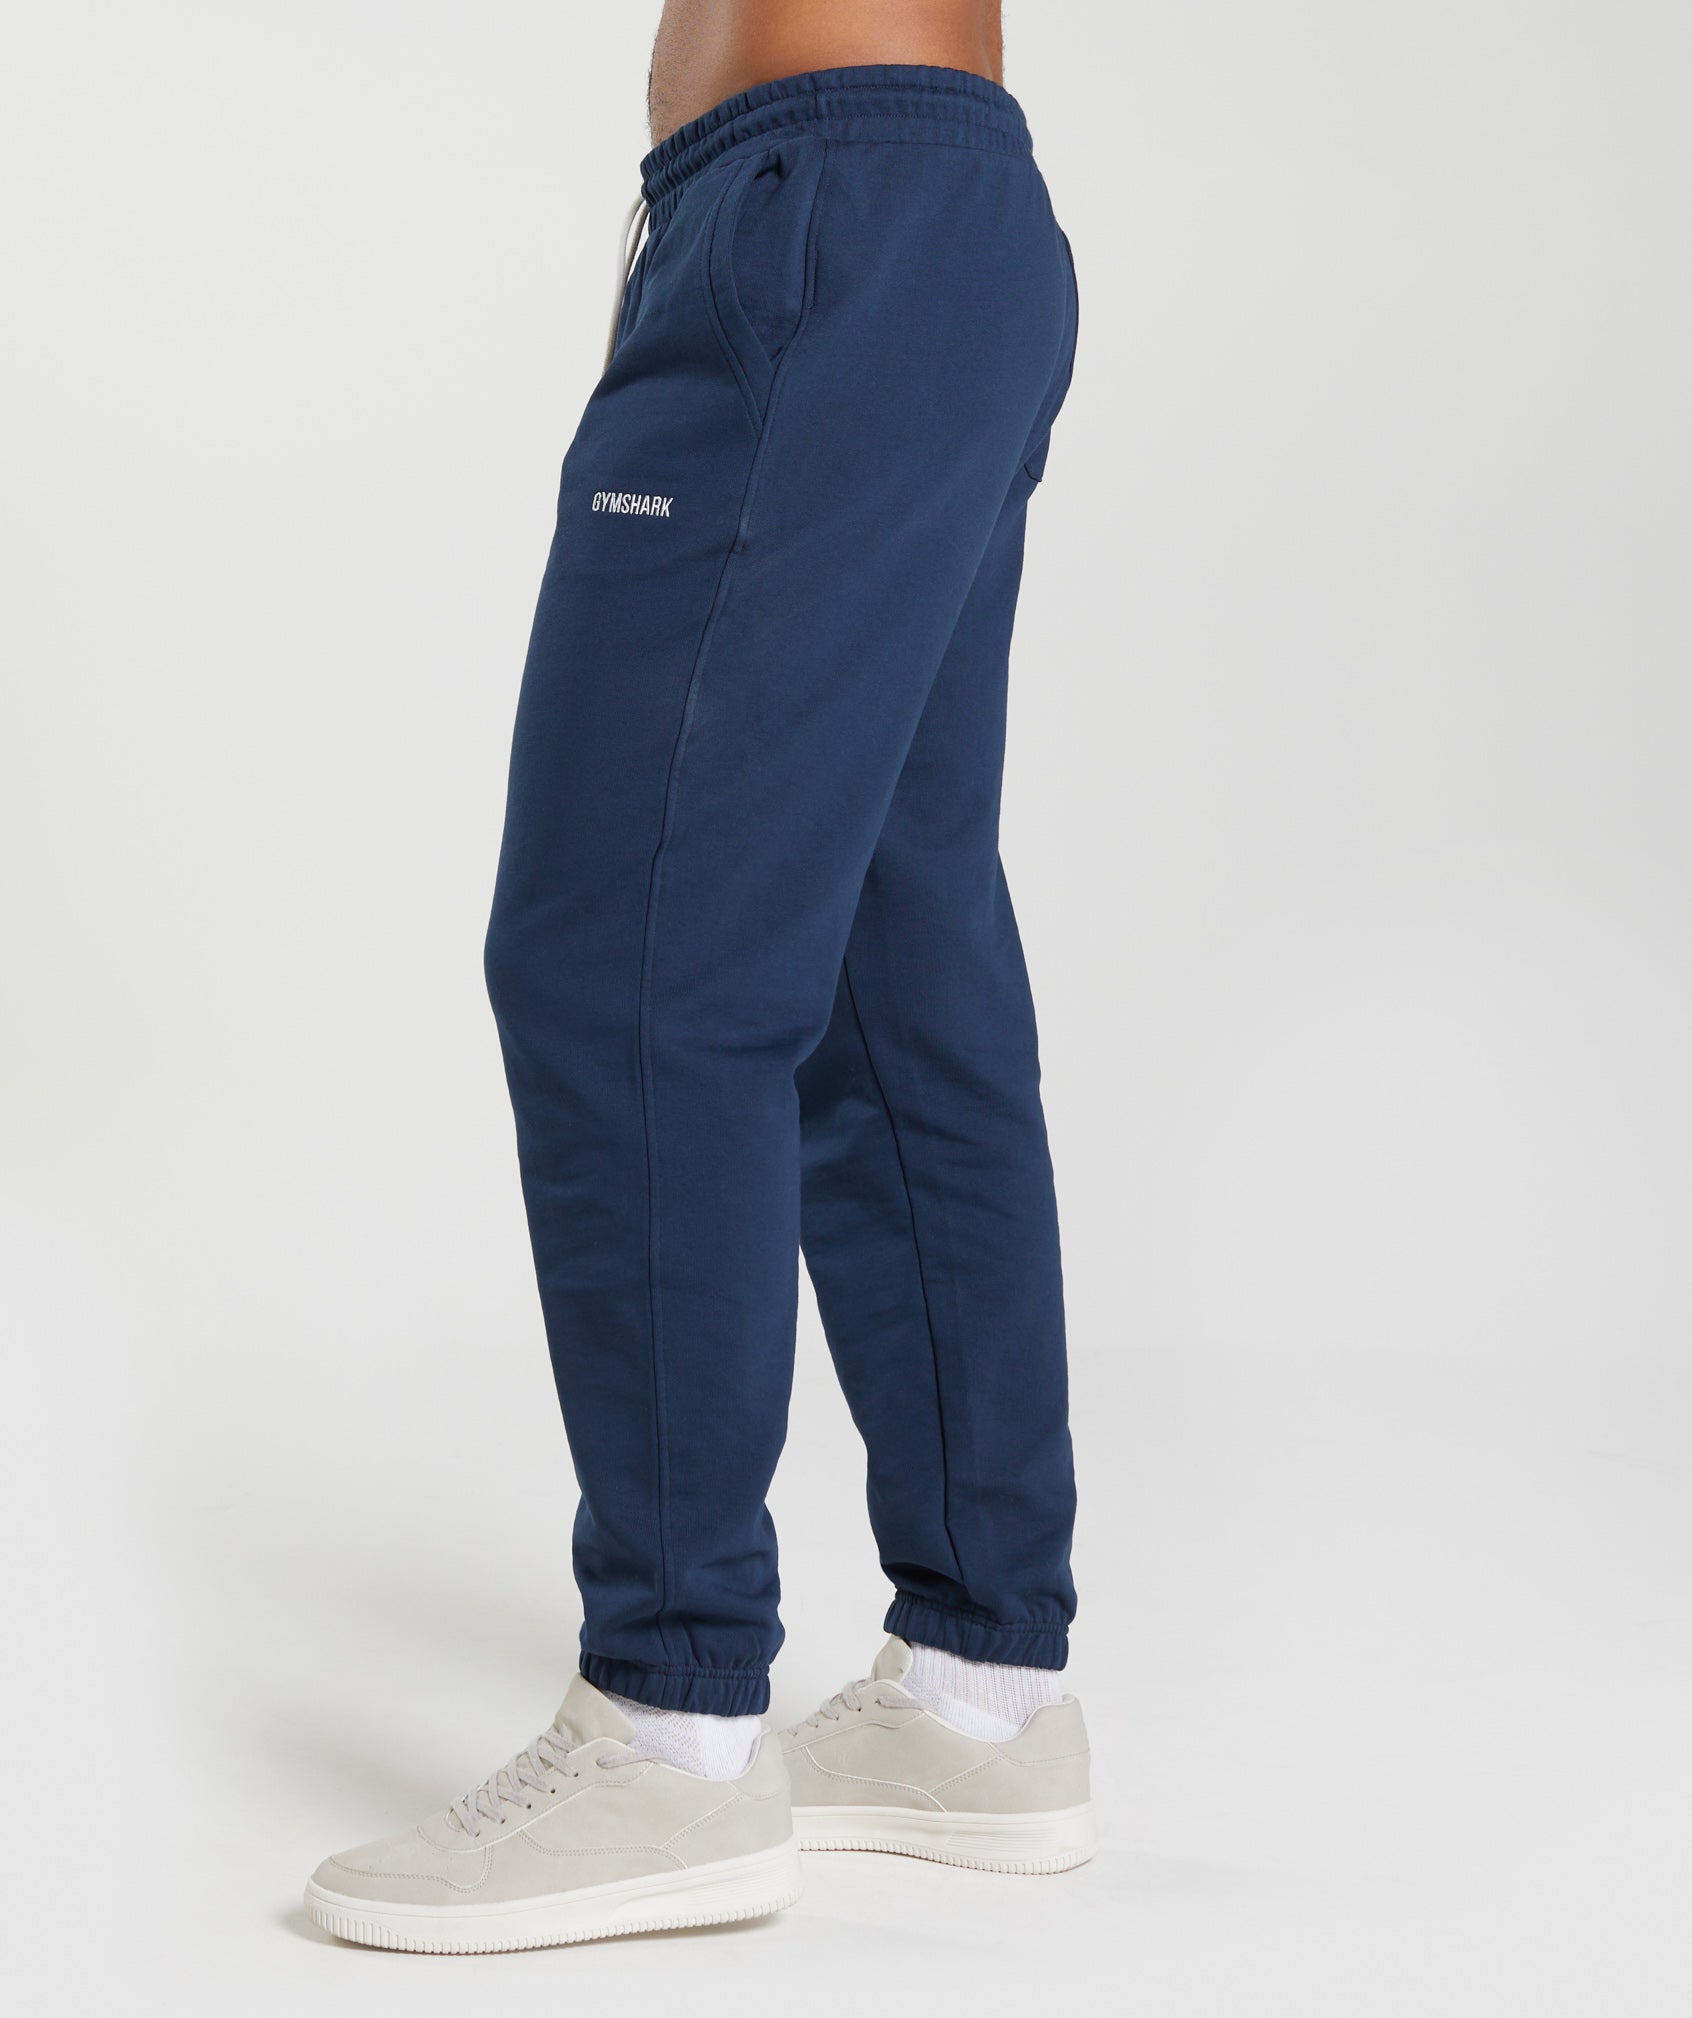 Rest Day Sweats Joggers in Navy - view 4